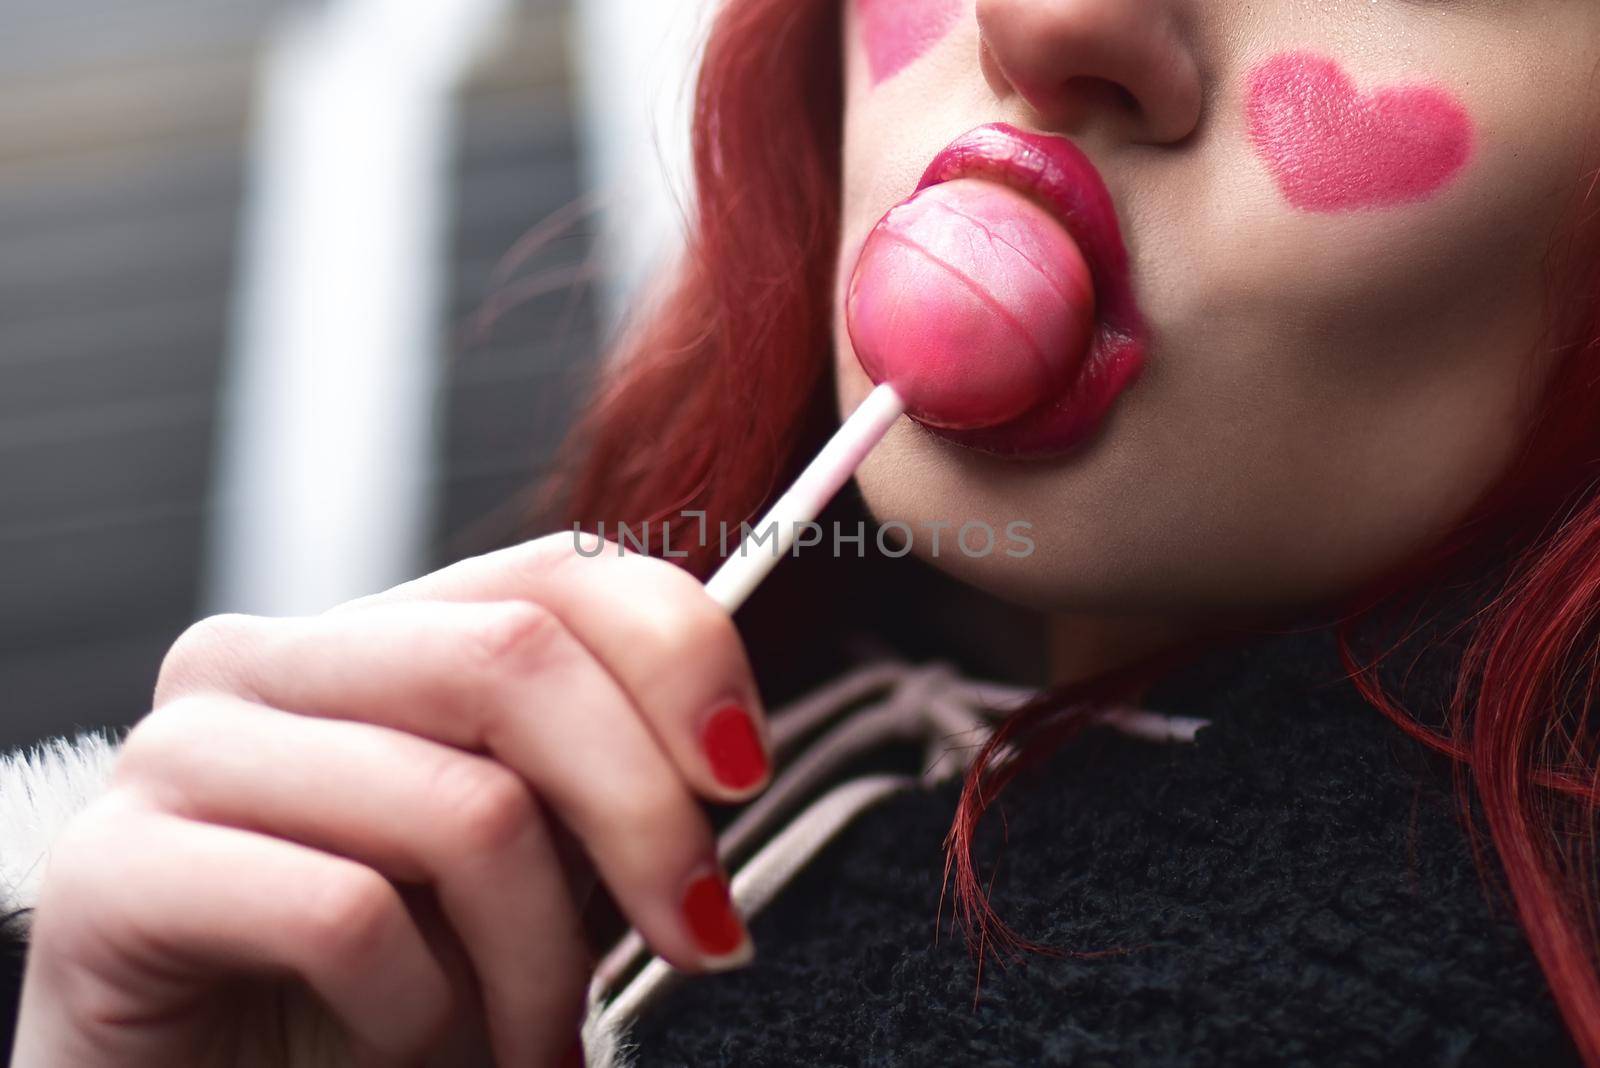 Glamorous photo with sexy female lips licking a strawberry lollipop. Beautiful daring bright fashionable makeup.